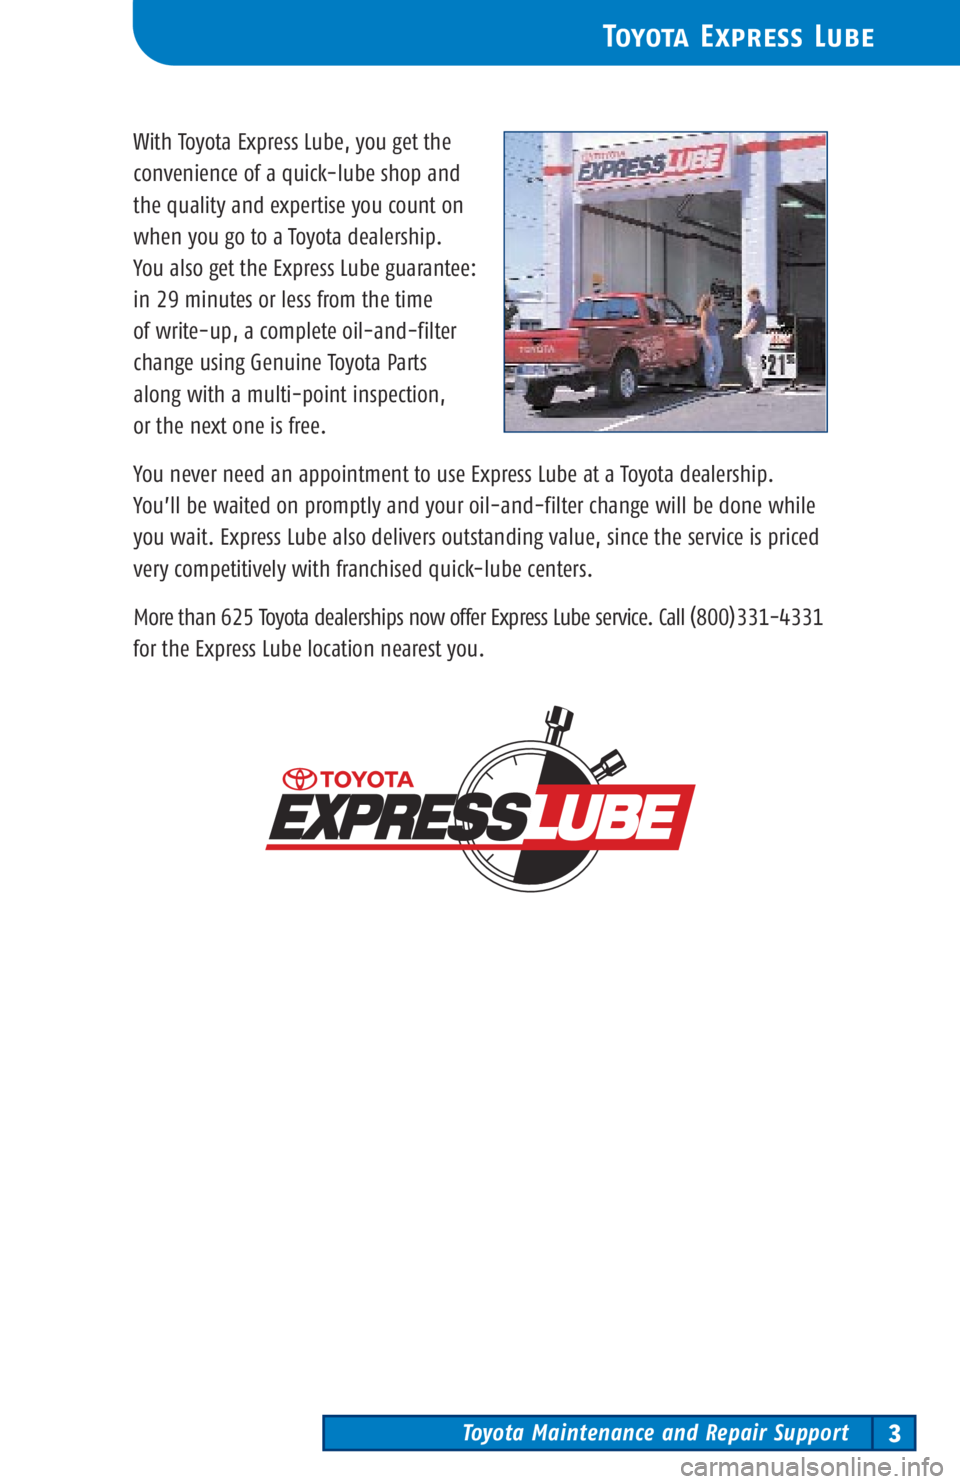 TOYOTA TACOMA 2003  Warranties & Maintenance Guides (in English) Toyota Maintenance and Repair Support3
Toyota Express Lube
With Toyota Express Lube, you get the
convenience of a quick-lube shop and 
the quality and expertise you count on
when you go to a Toyota de